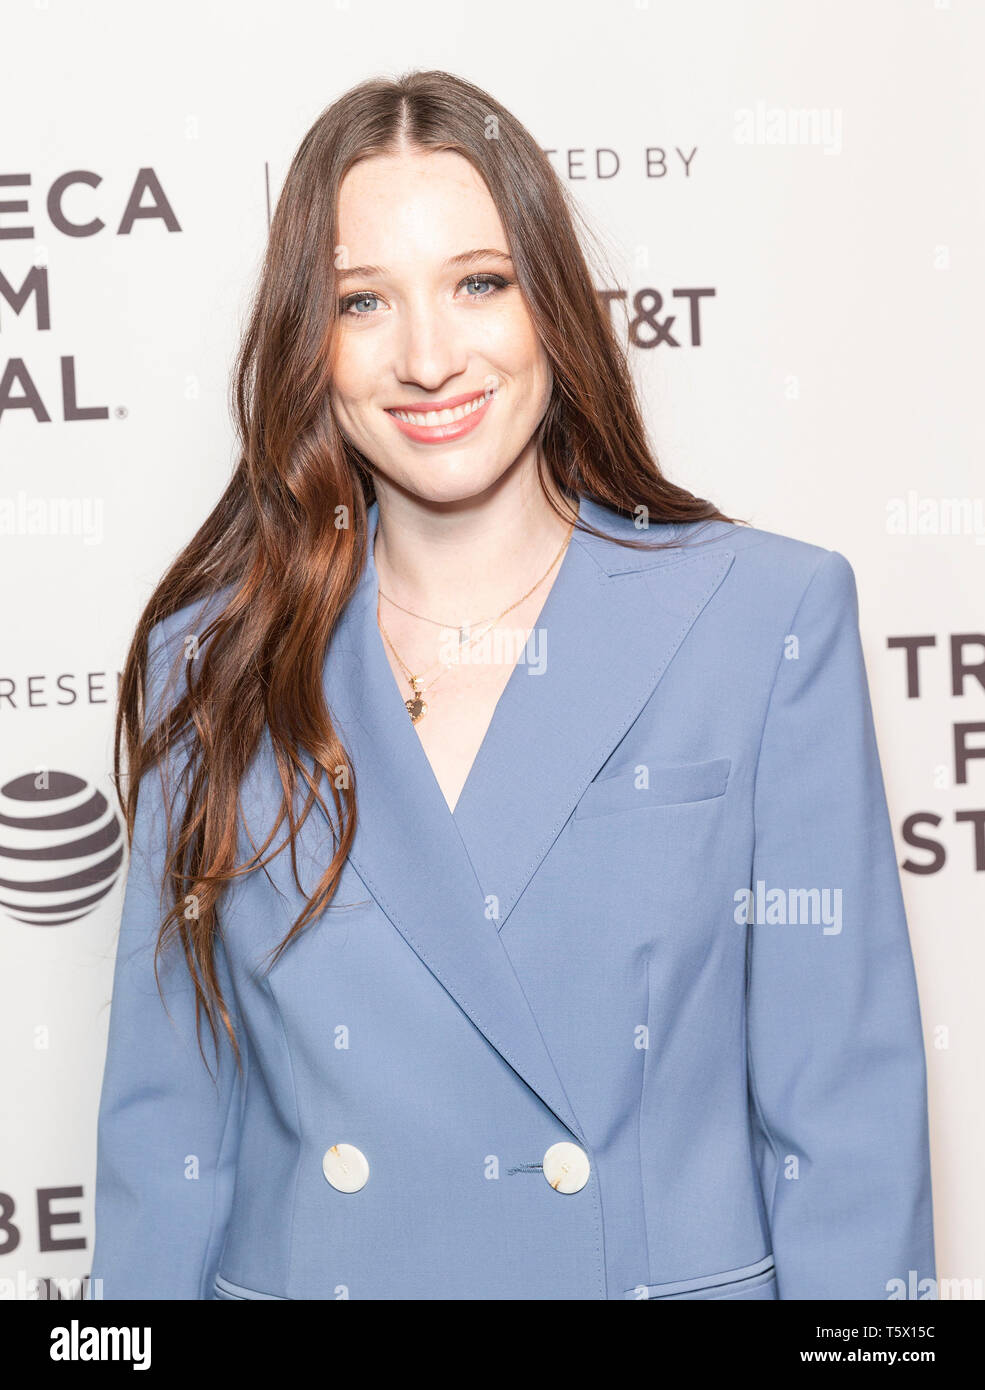 New York, United States. 26th Apr, 2019. Sophie Lowe wearing dress by Camilla Mack attends the Blow The Man Down screening at Tribeca Film Festival at SVA Theatre Credit: Lev Radin/Pacific Press/Alamy Live News Stock Photo